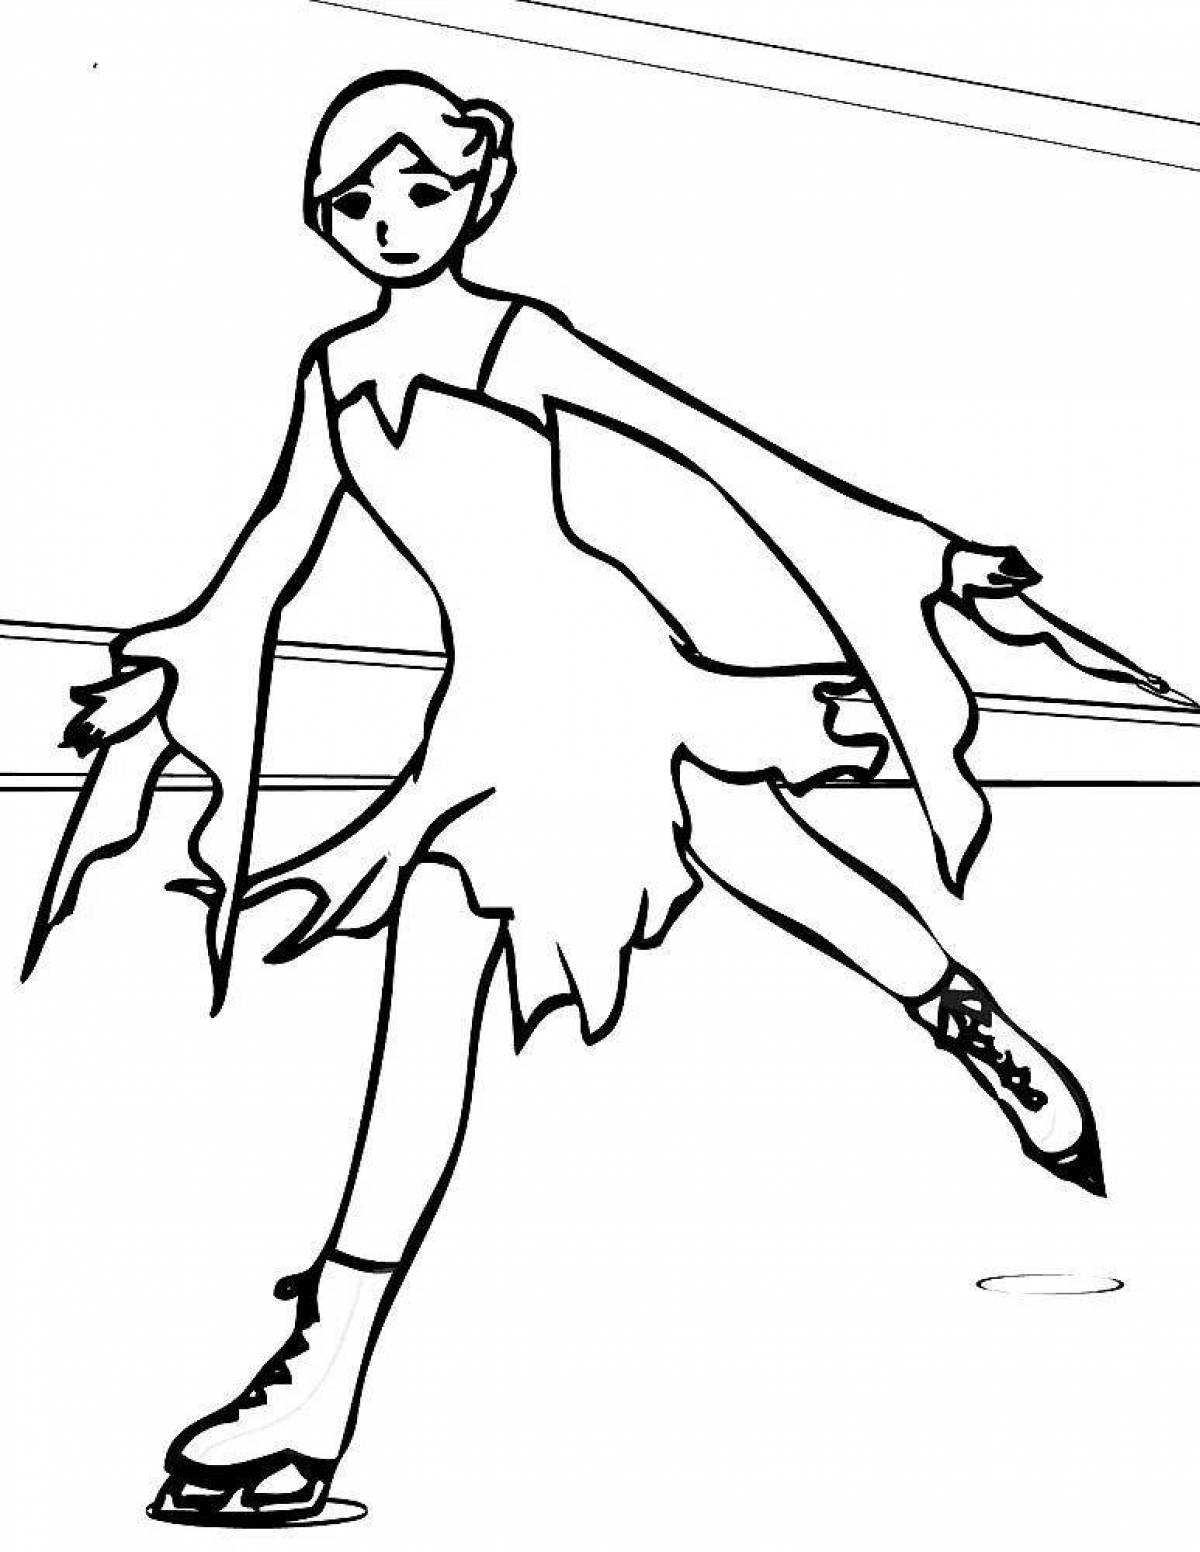 Animated figure skater coloring page for kids